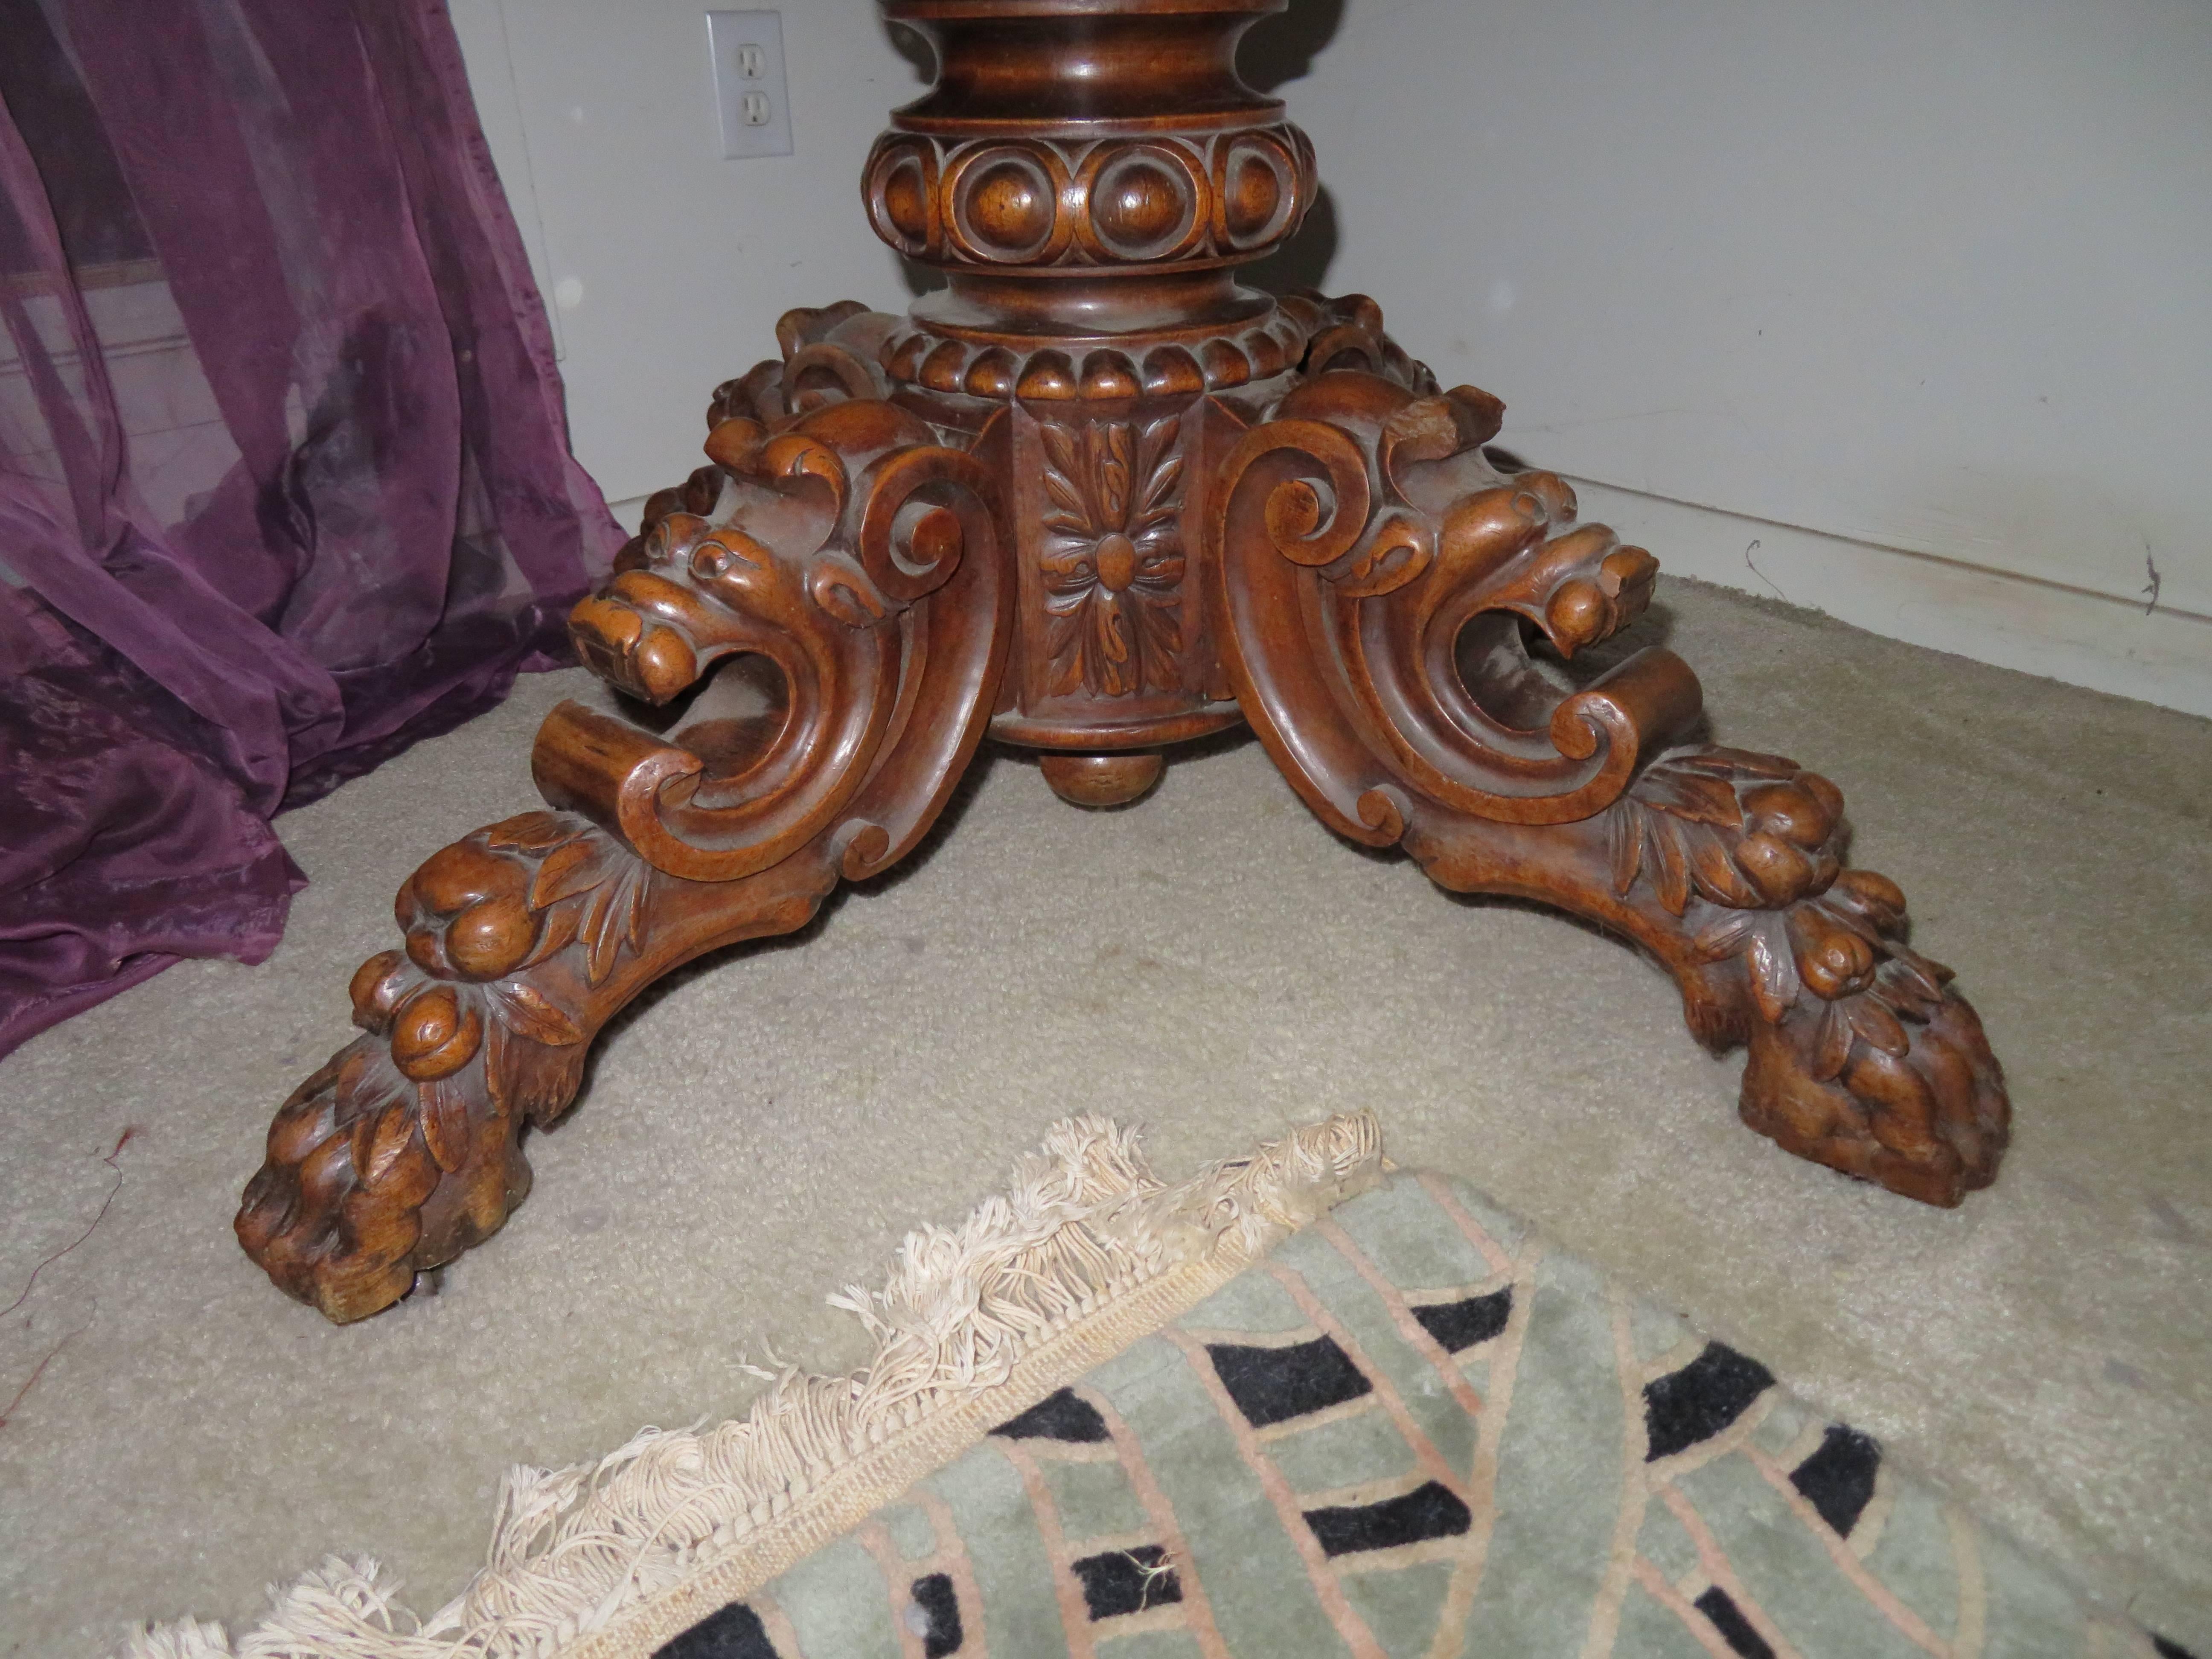 Absolutely stunning antique French carved griffin oval dining table. Massive carved pedestal base supported by ornate hand-carved dimensional griffins on all four legs with a lovely pecan wood top. The oval tabletop is gorgeous with lovely carved